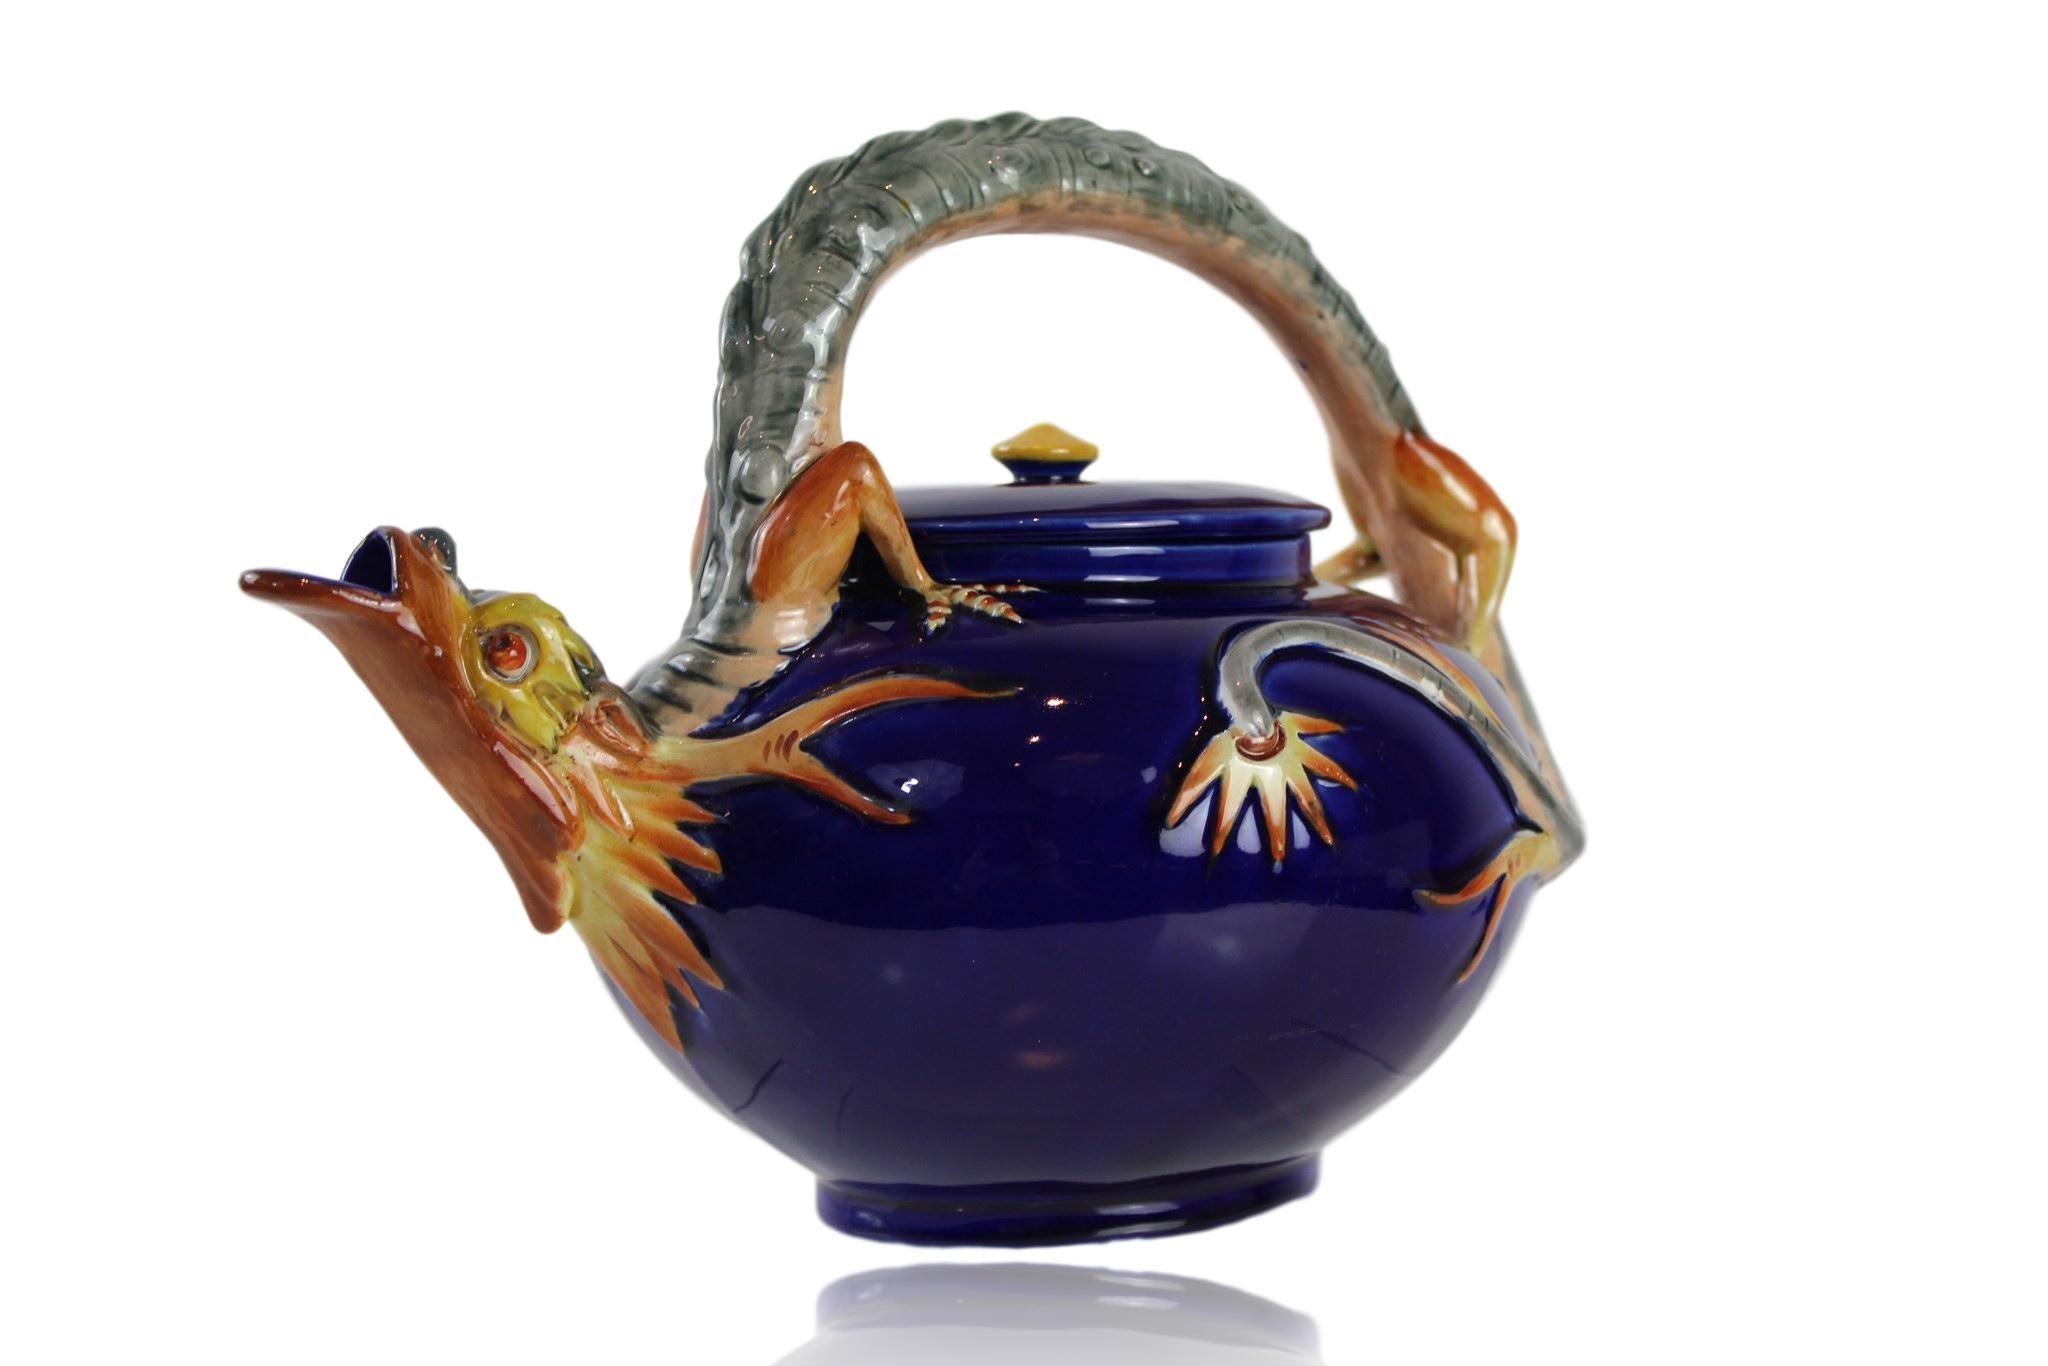 Large Wedgwood Majolica Dragon teapot in cobalt blue, English, Dated 1871, modeled by the famous mid-19th century French sculptor, Hugues Protât. In the Japonisme taste; the bail handle modeled as a dragon, its tail curled around the ovid-shaped pot